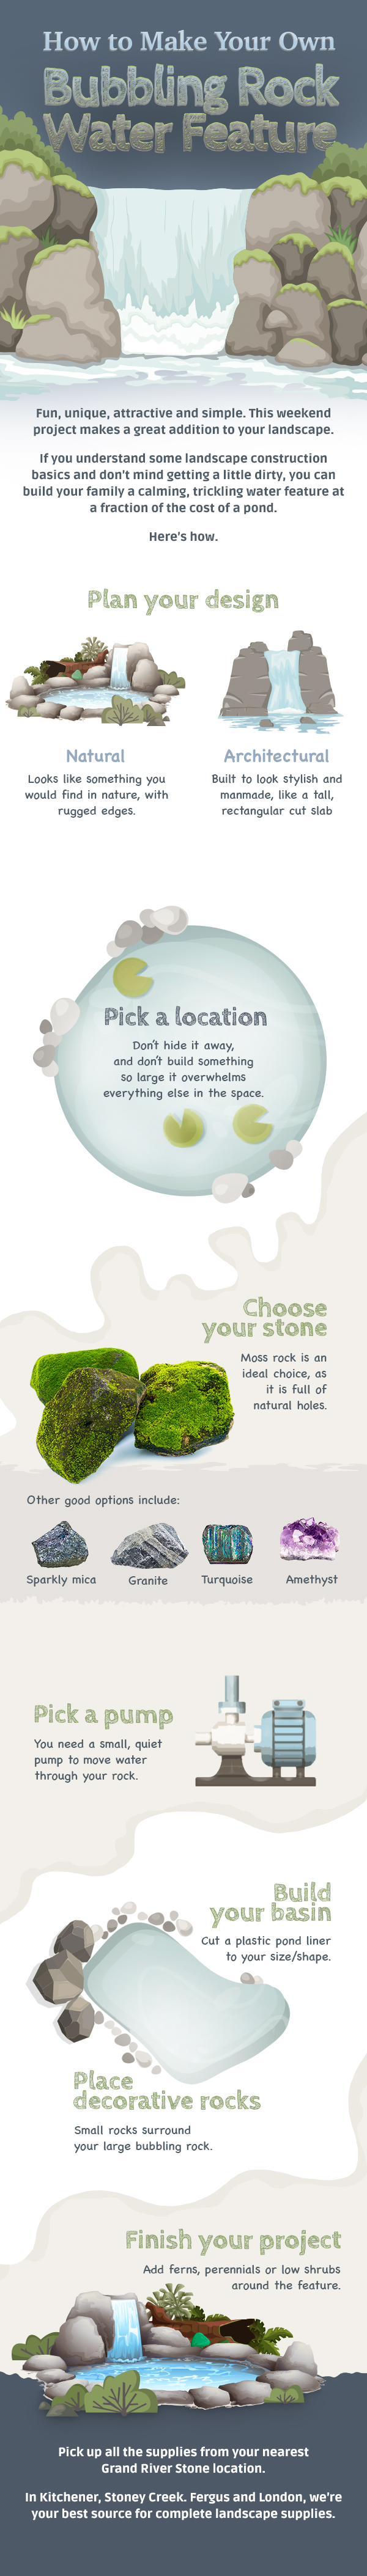 Bubbling Rock Water Feature Guide: an infographic explaining how to create bubbling garden rocks.